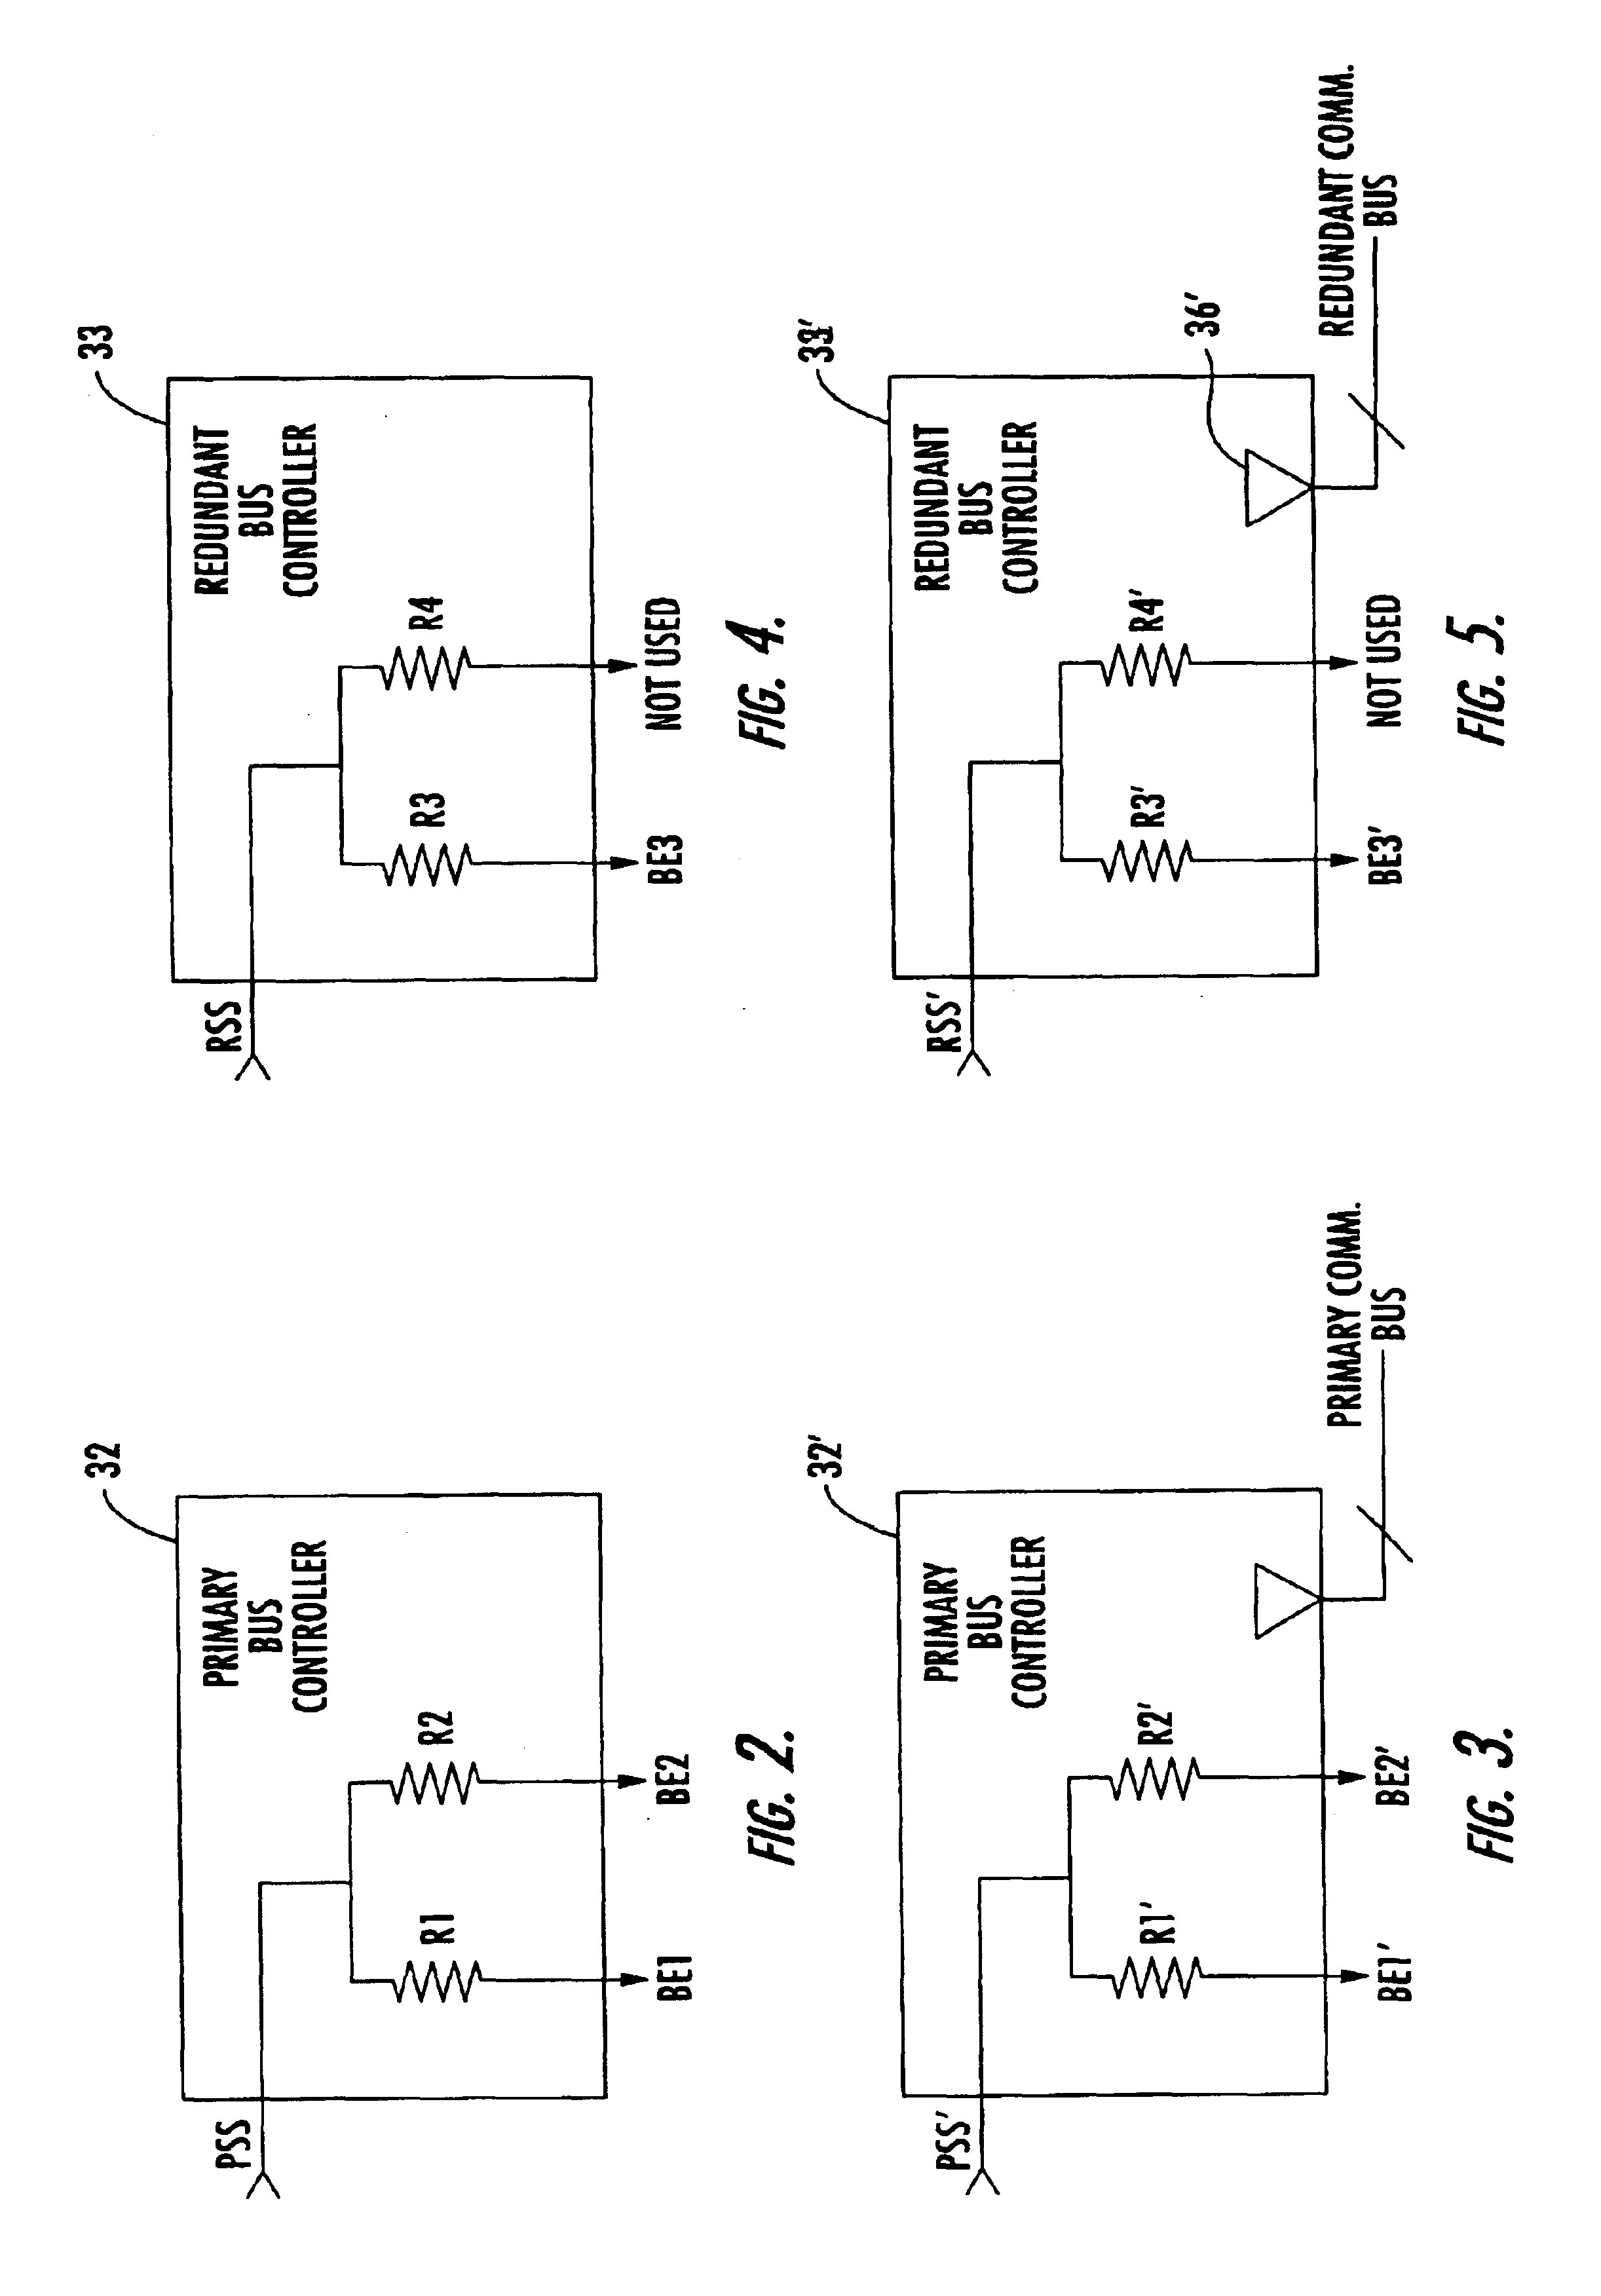 Fault-tolerant communications system and associated methods